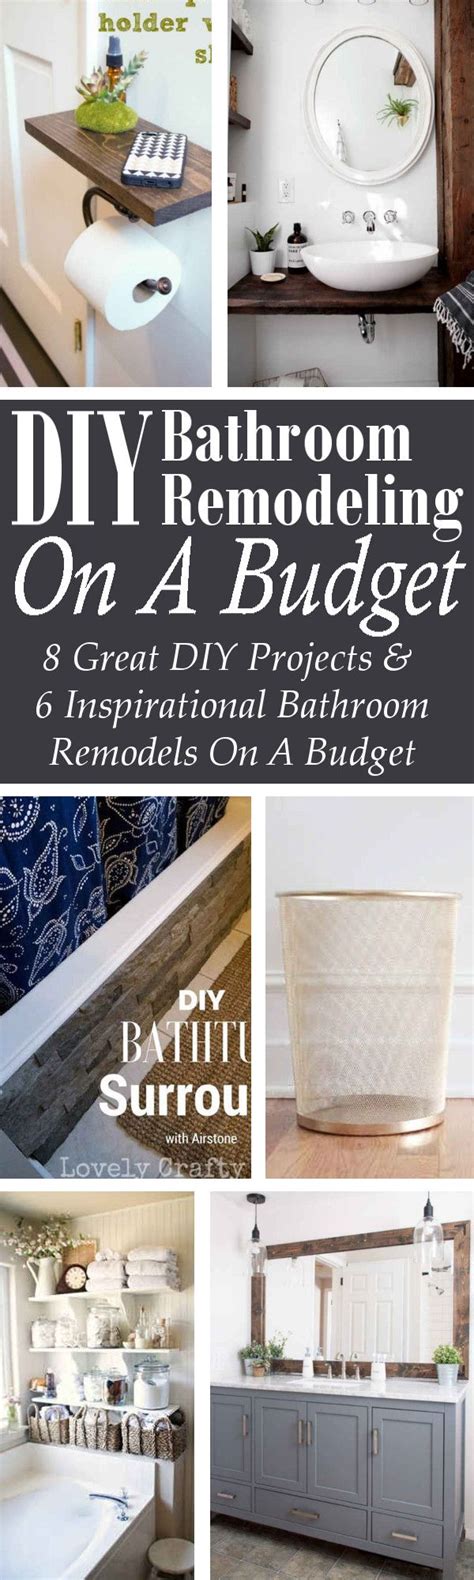 Diy Bathroom Remodeling On A Budget Bathroom Transformations And Do It